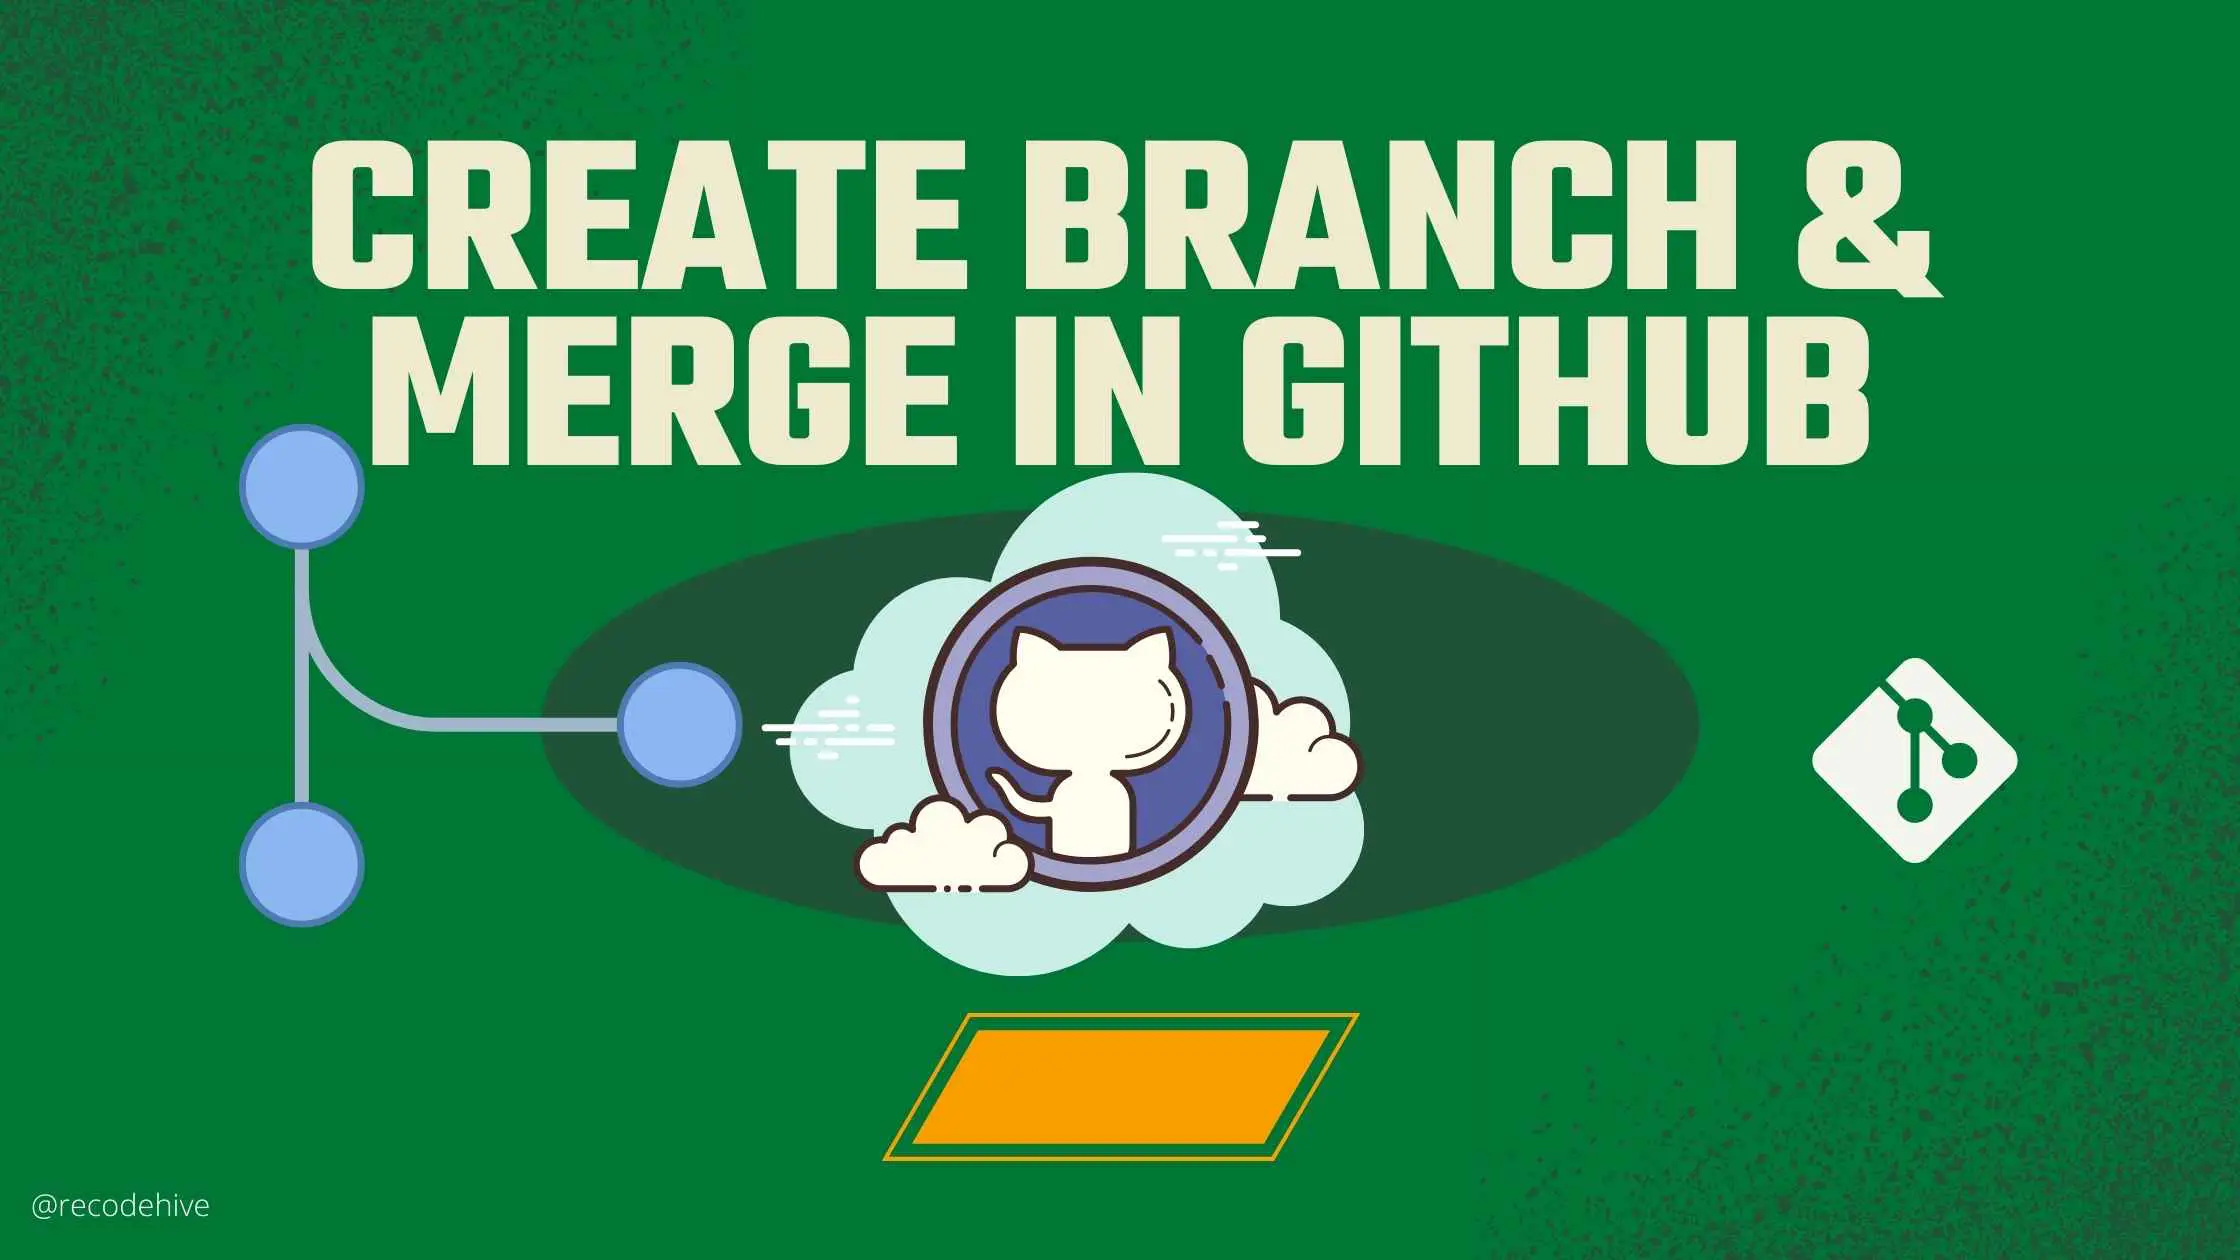 git change branch without losing changes